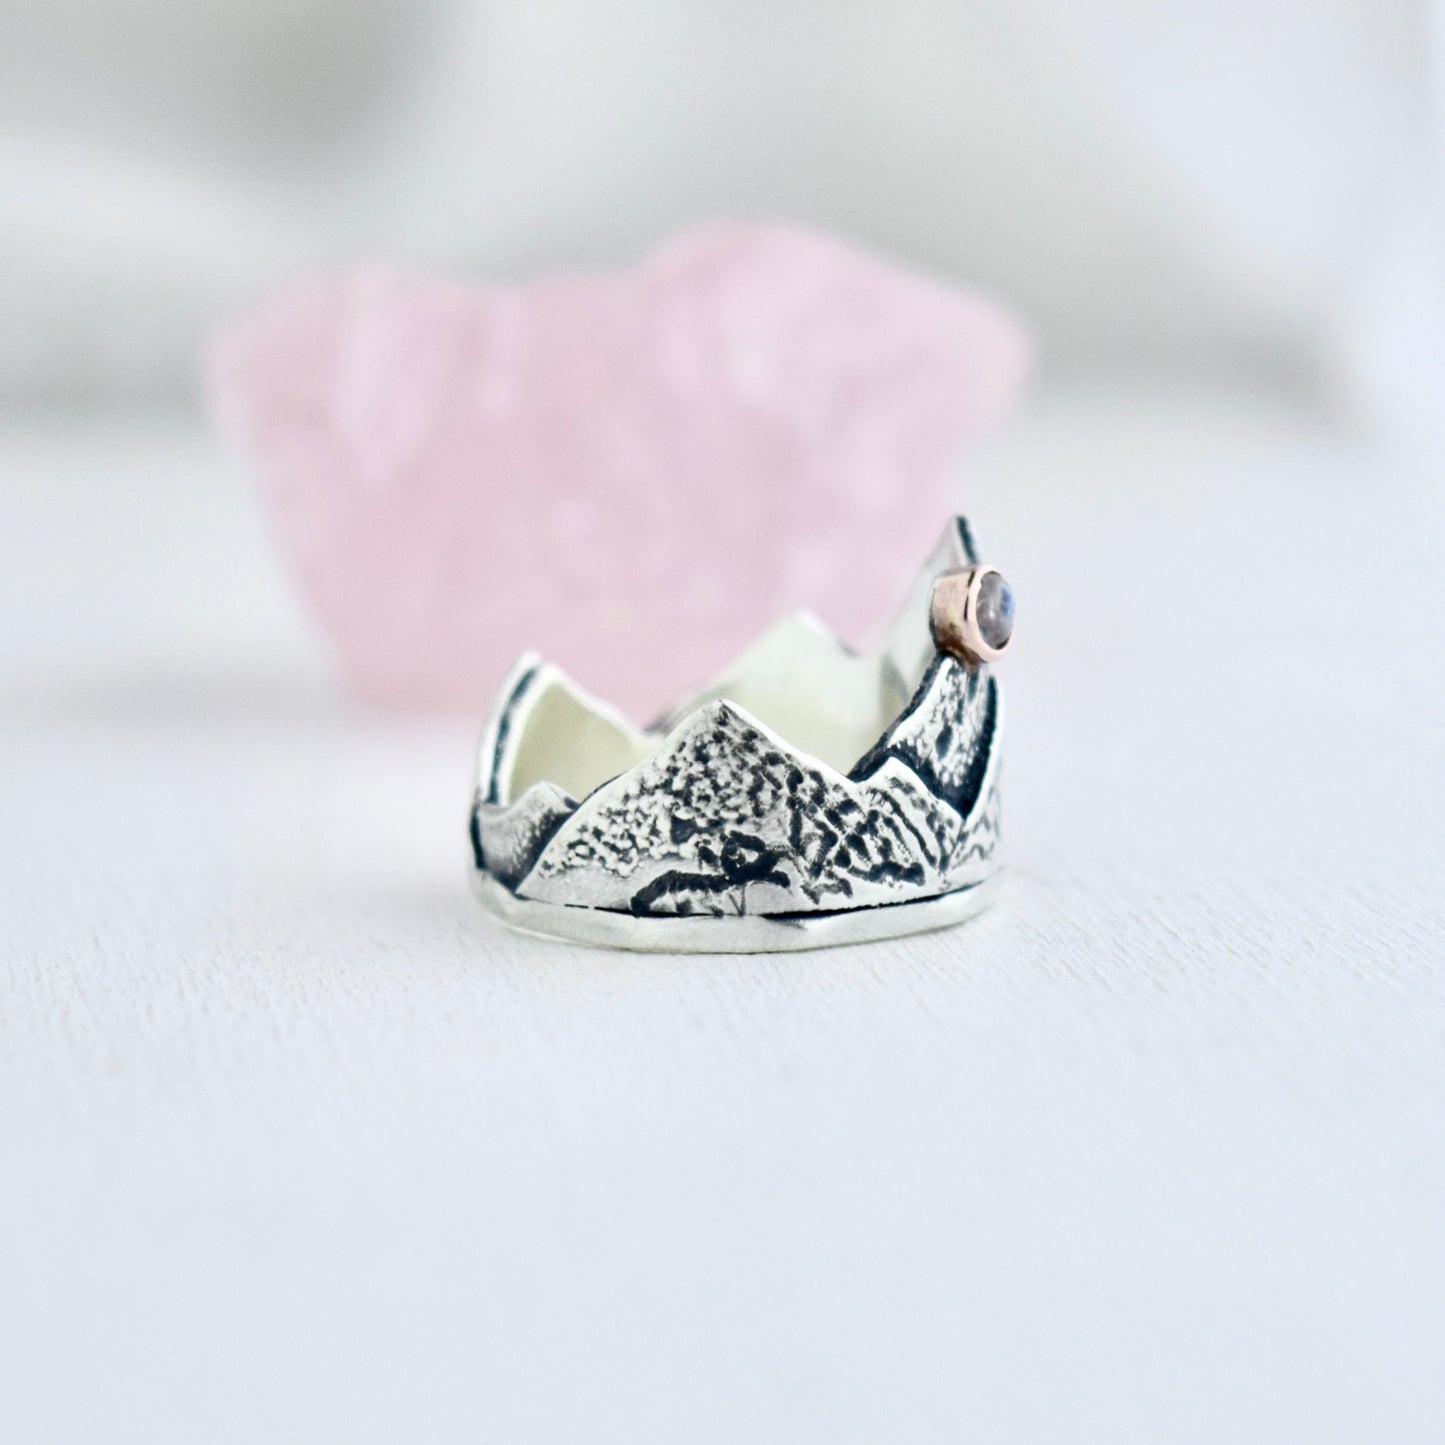 Snowy Mountain Range Armor Ring with Rainbow Moonstone and 14k Solid Rose Gold size 7